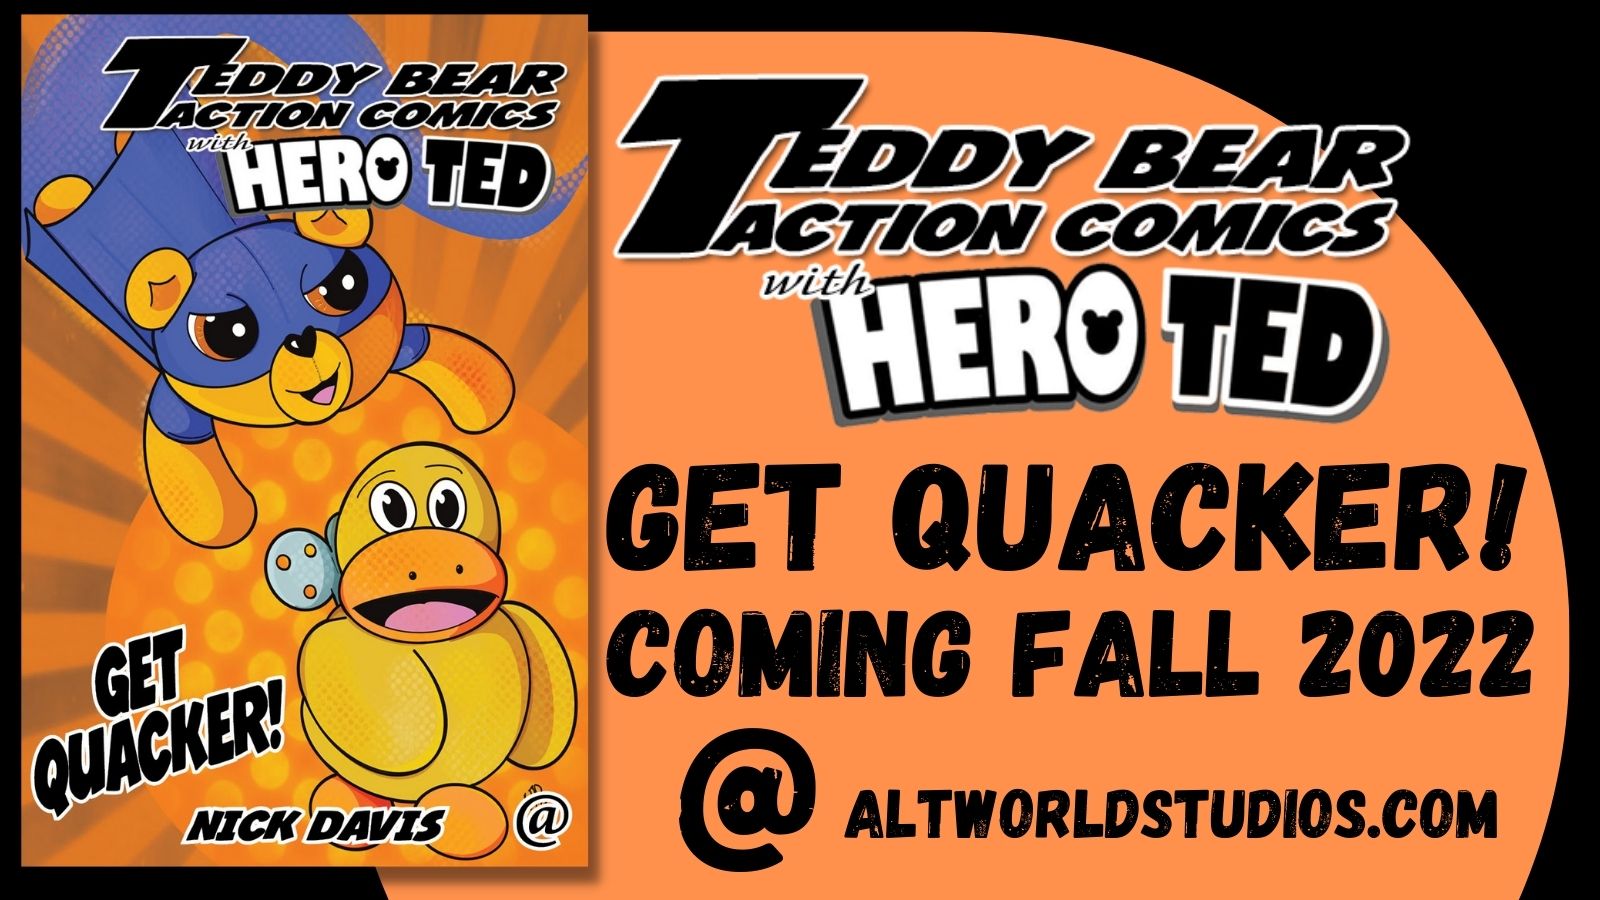 Teddy Bear Action Comics with Hero Ted - Get Quacker, coming Fall 2022